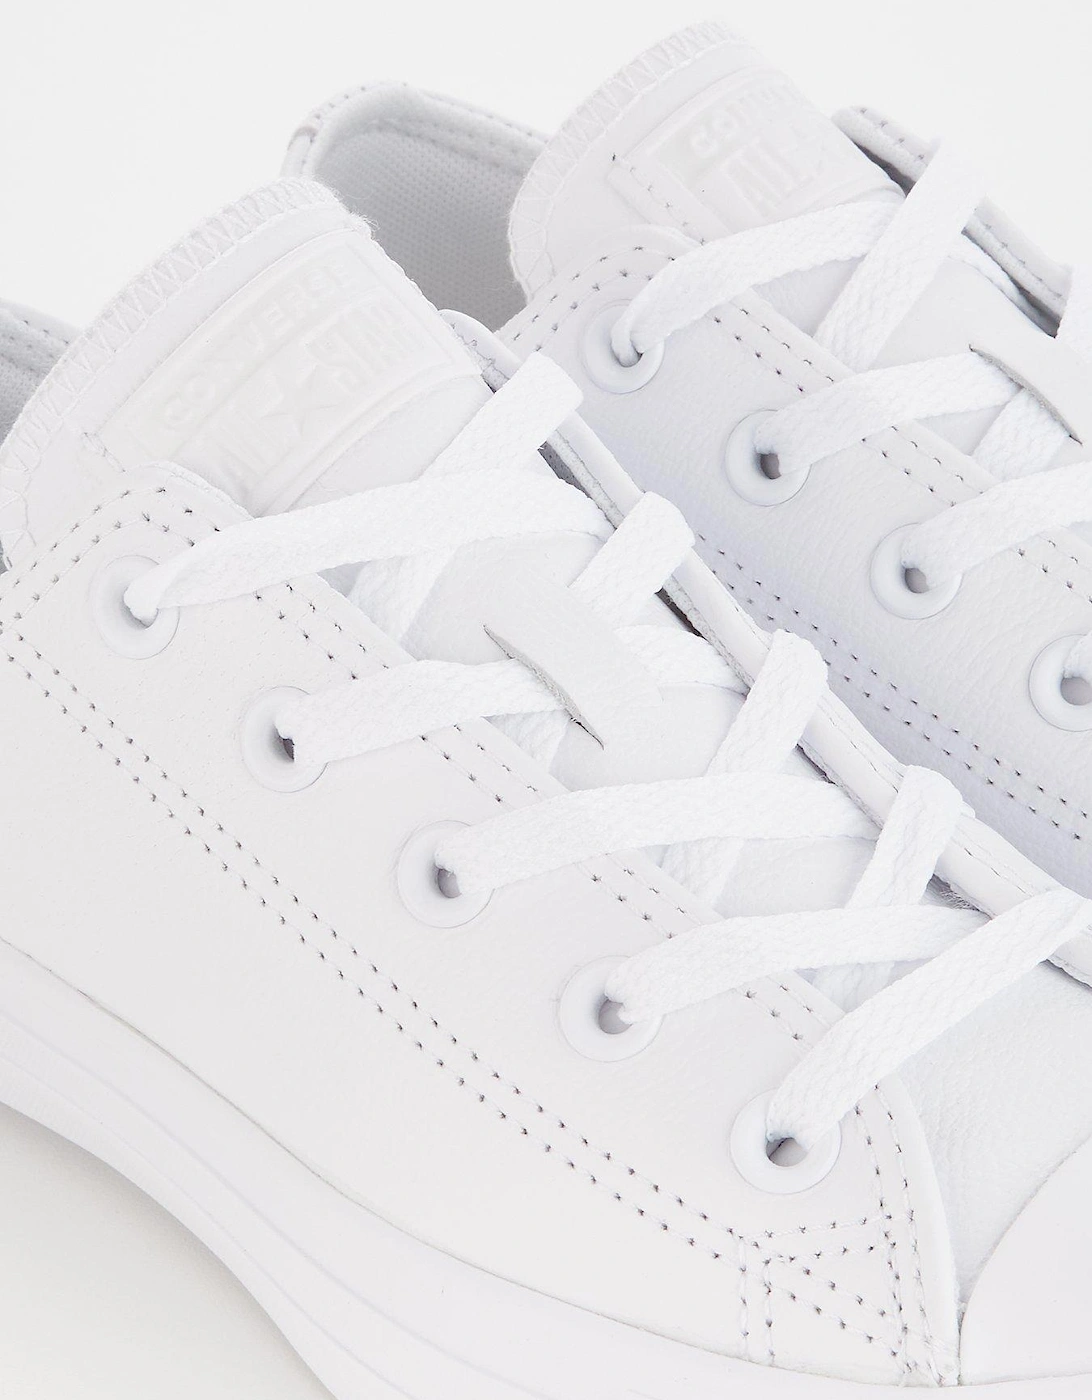 Unisex Leather Ox Trainers - White